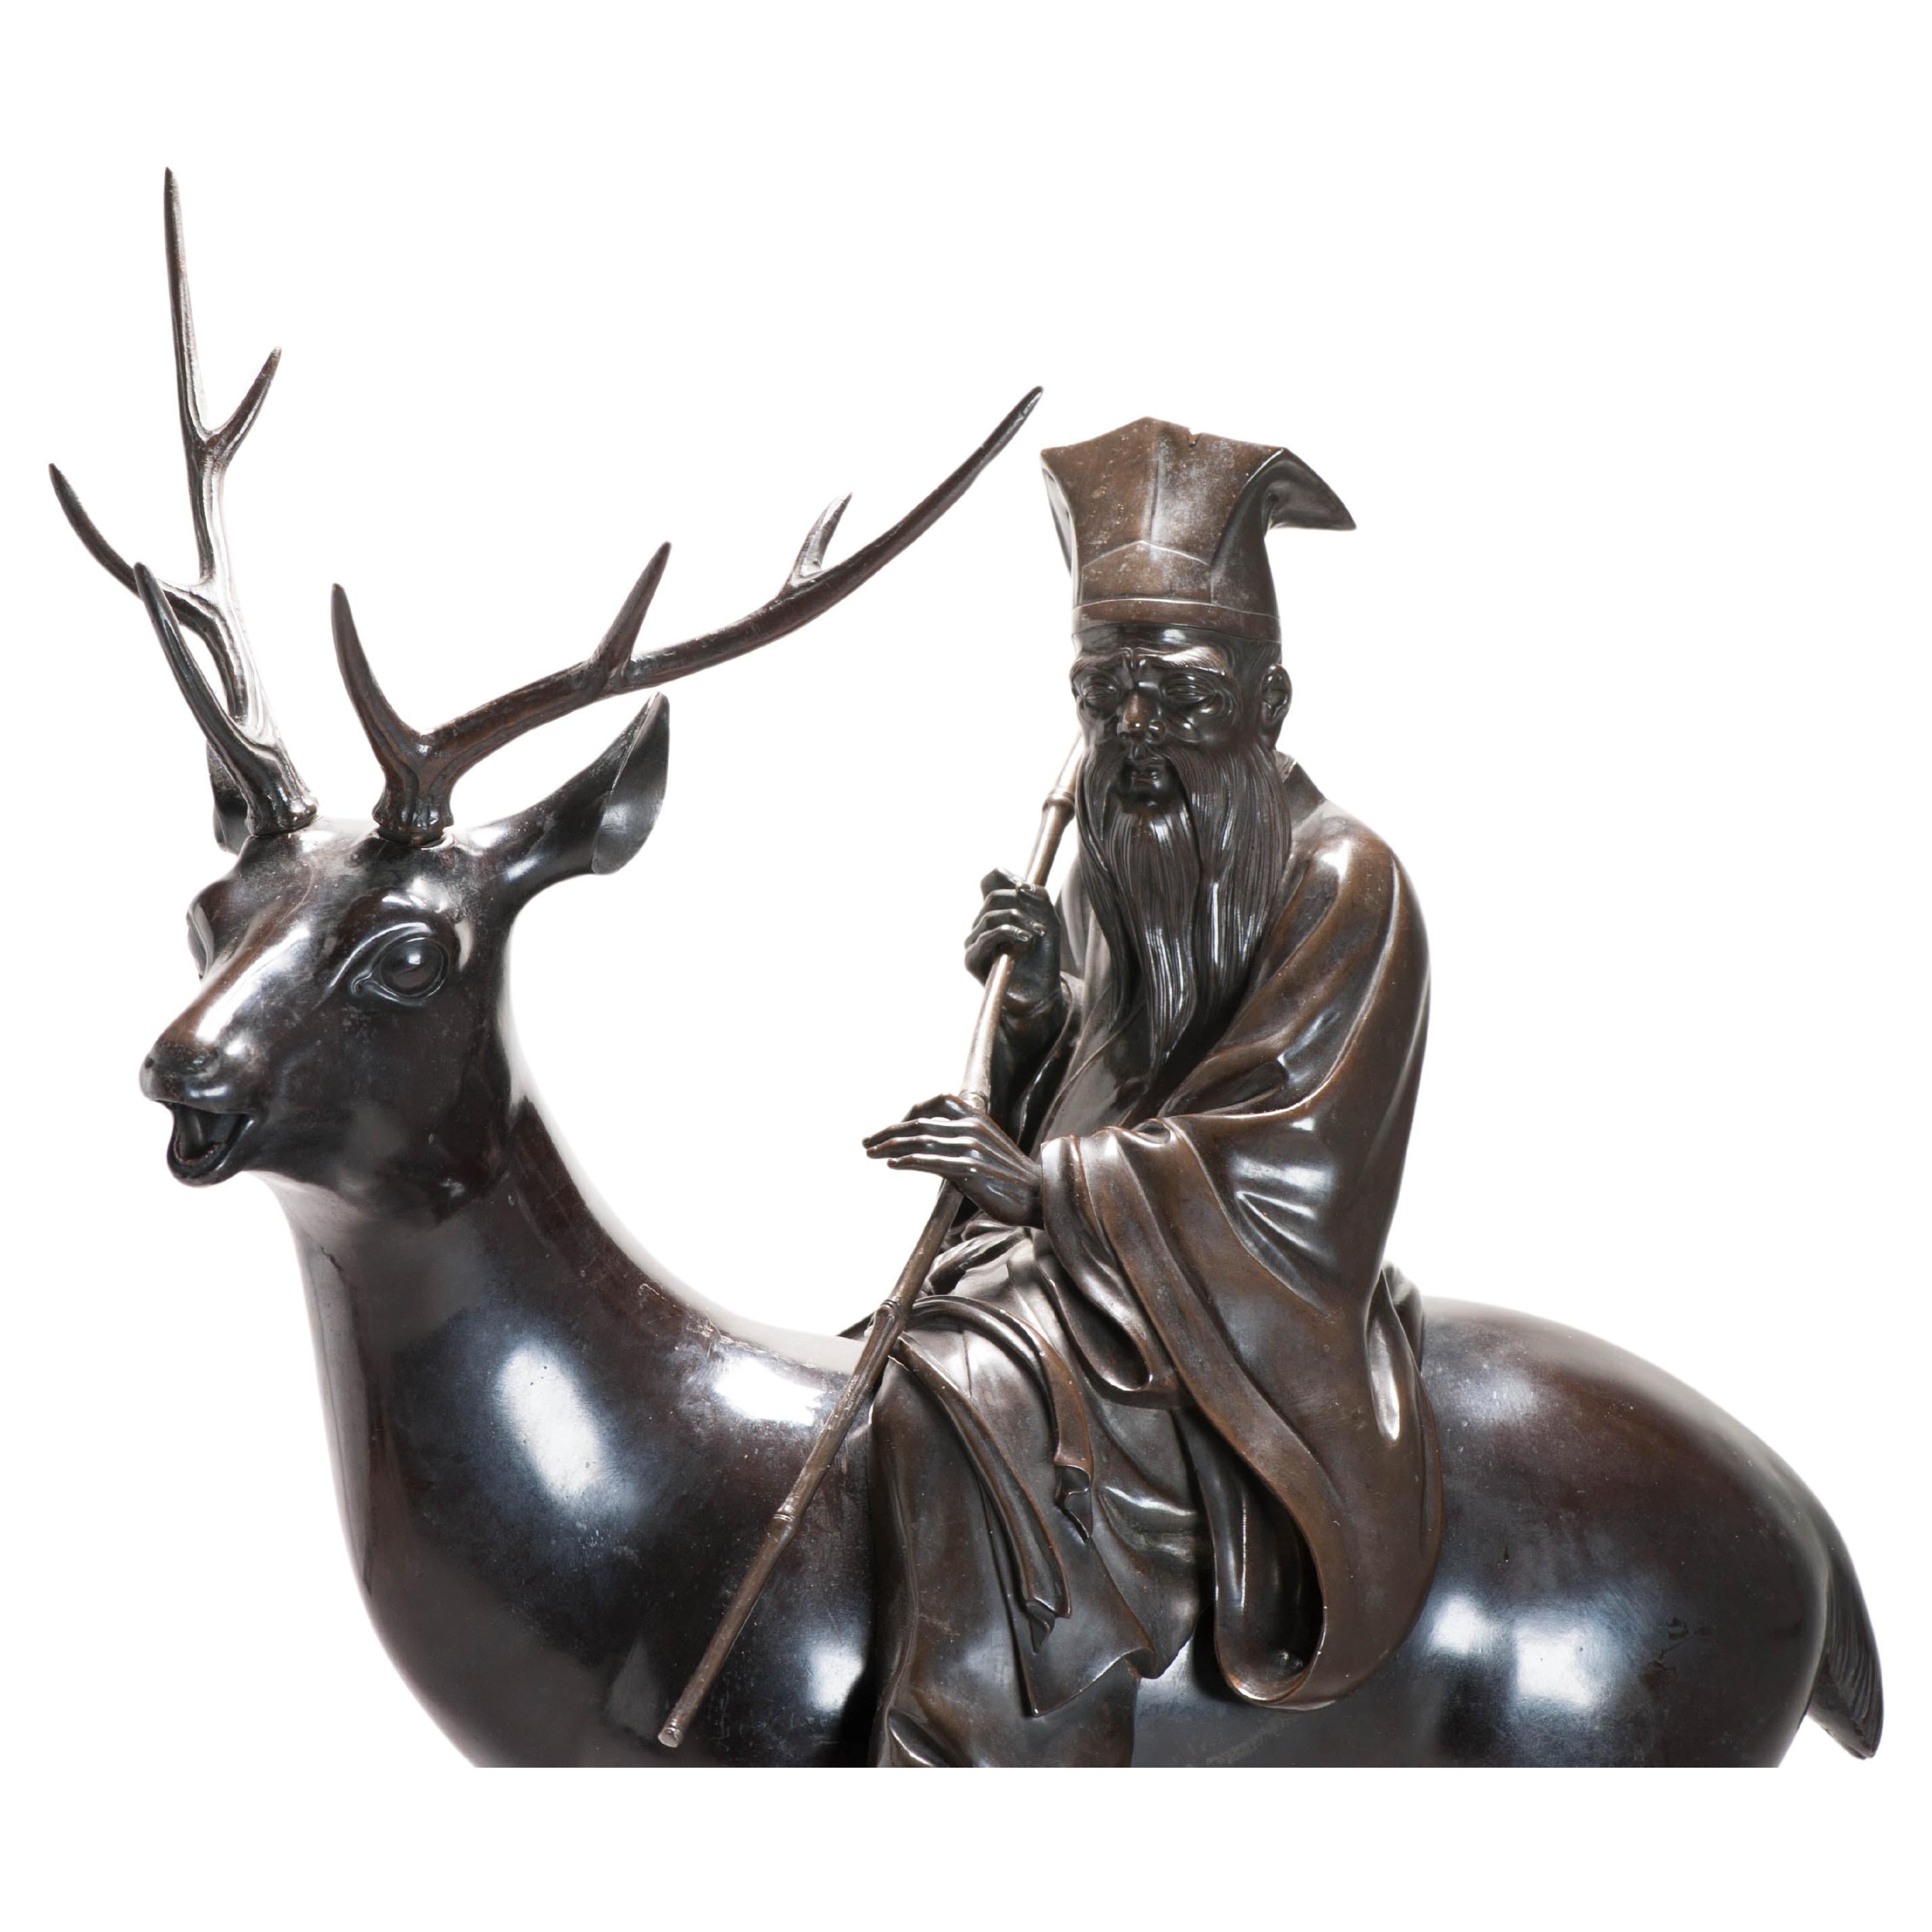 A very large and top quality Meiji period Incense burner of Jurojin - Shou Lao and a deer

God of longevity associated with the Canopus star of the South Pole. Usually represented as an old man, bald, with a high forehead and long white beard, and